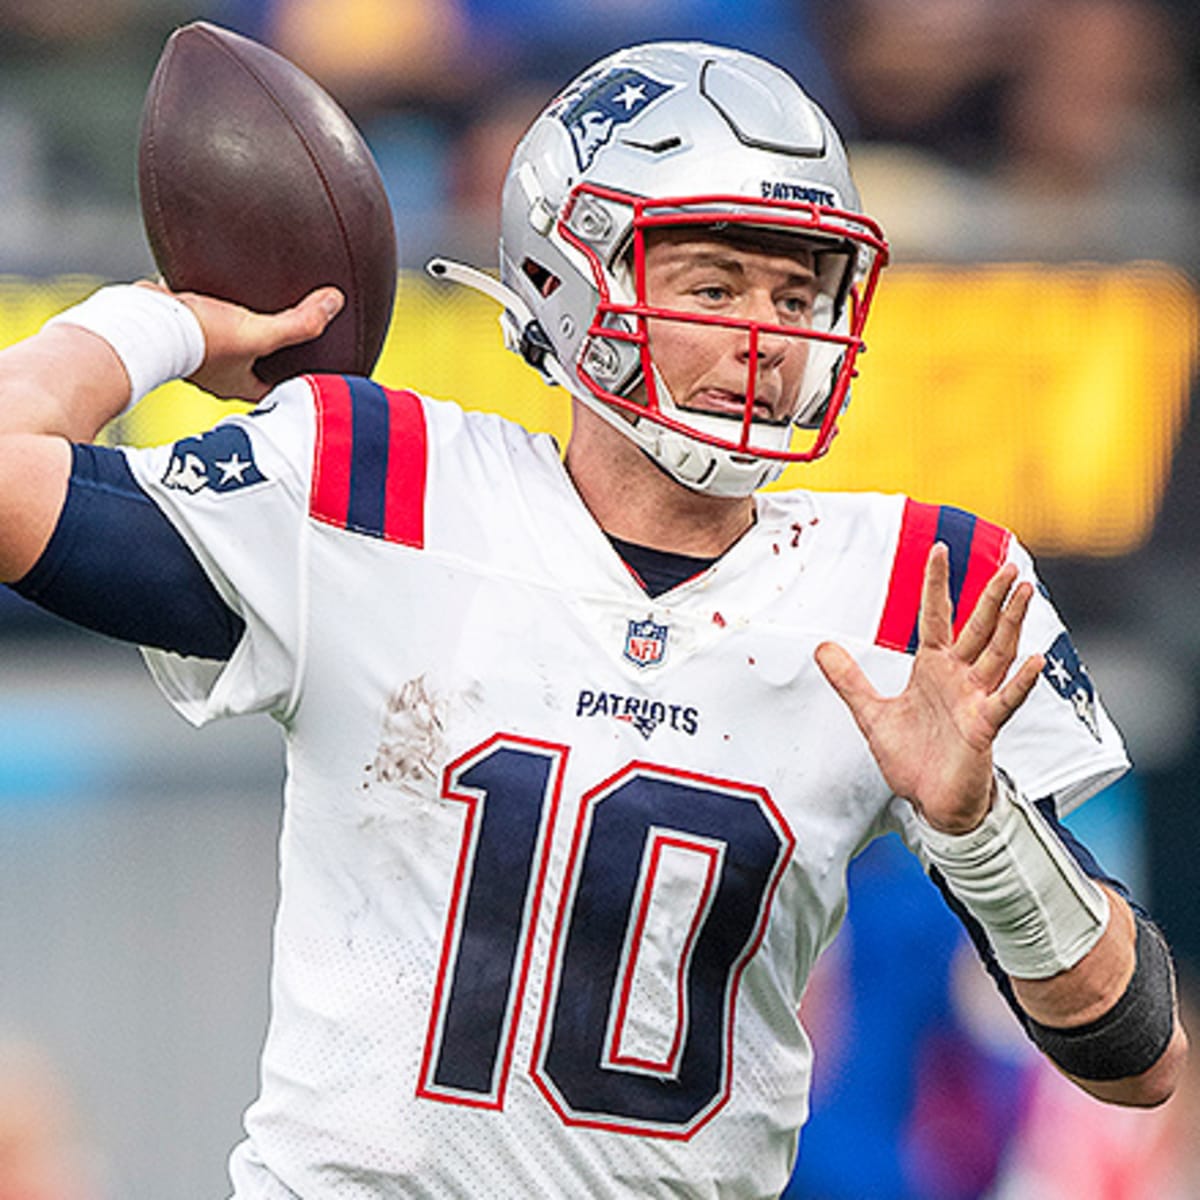 Patriots-Steelers Week 2 predictions: Will Pats get their first win of the  2022 season? - CBS Boston